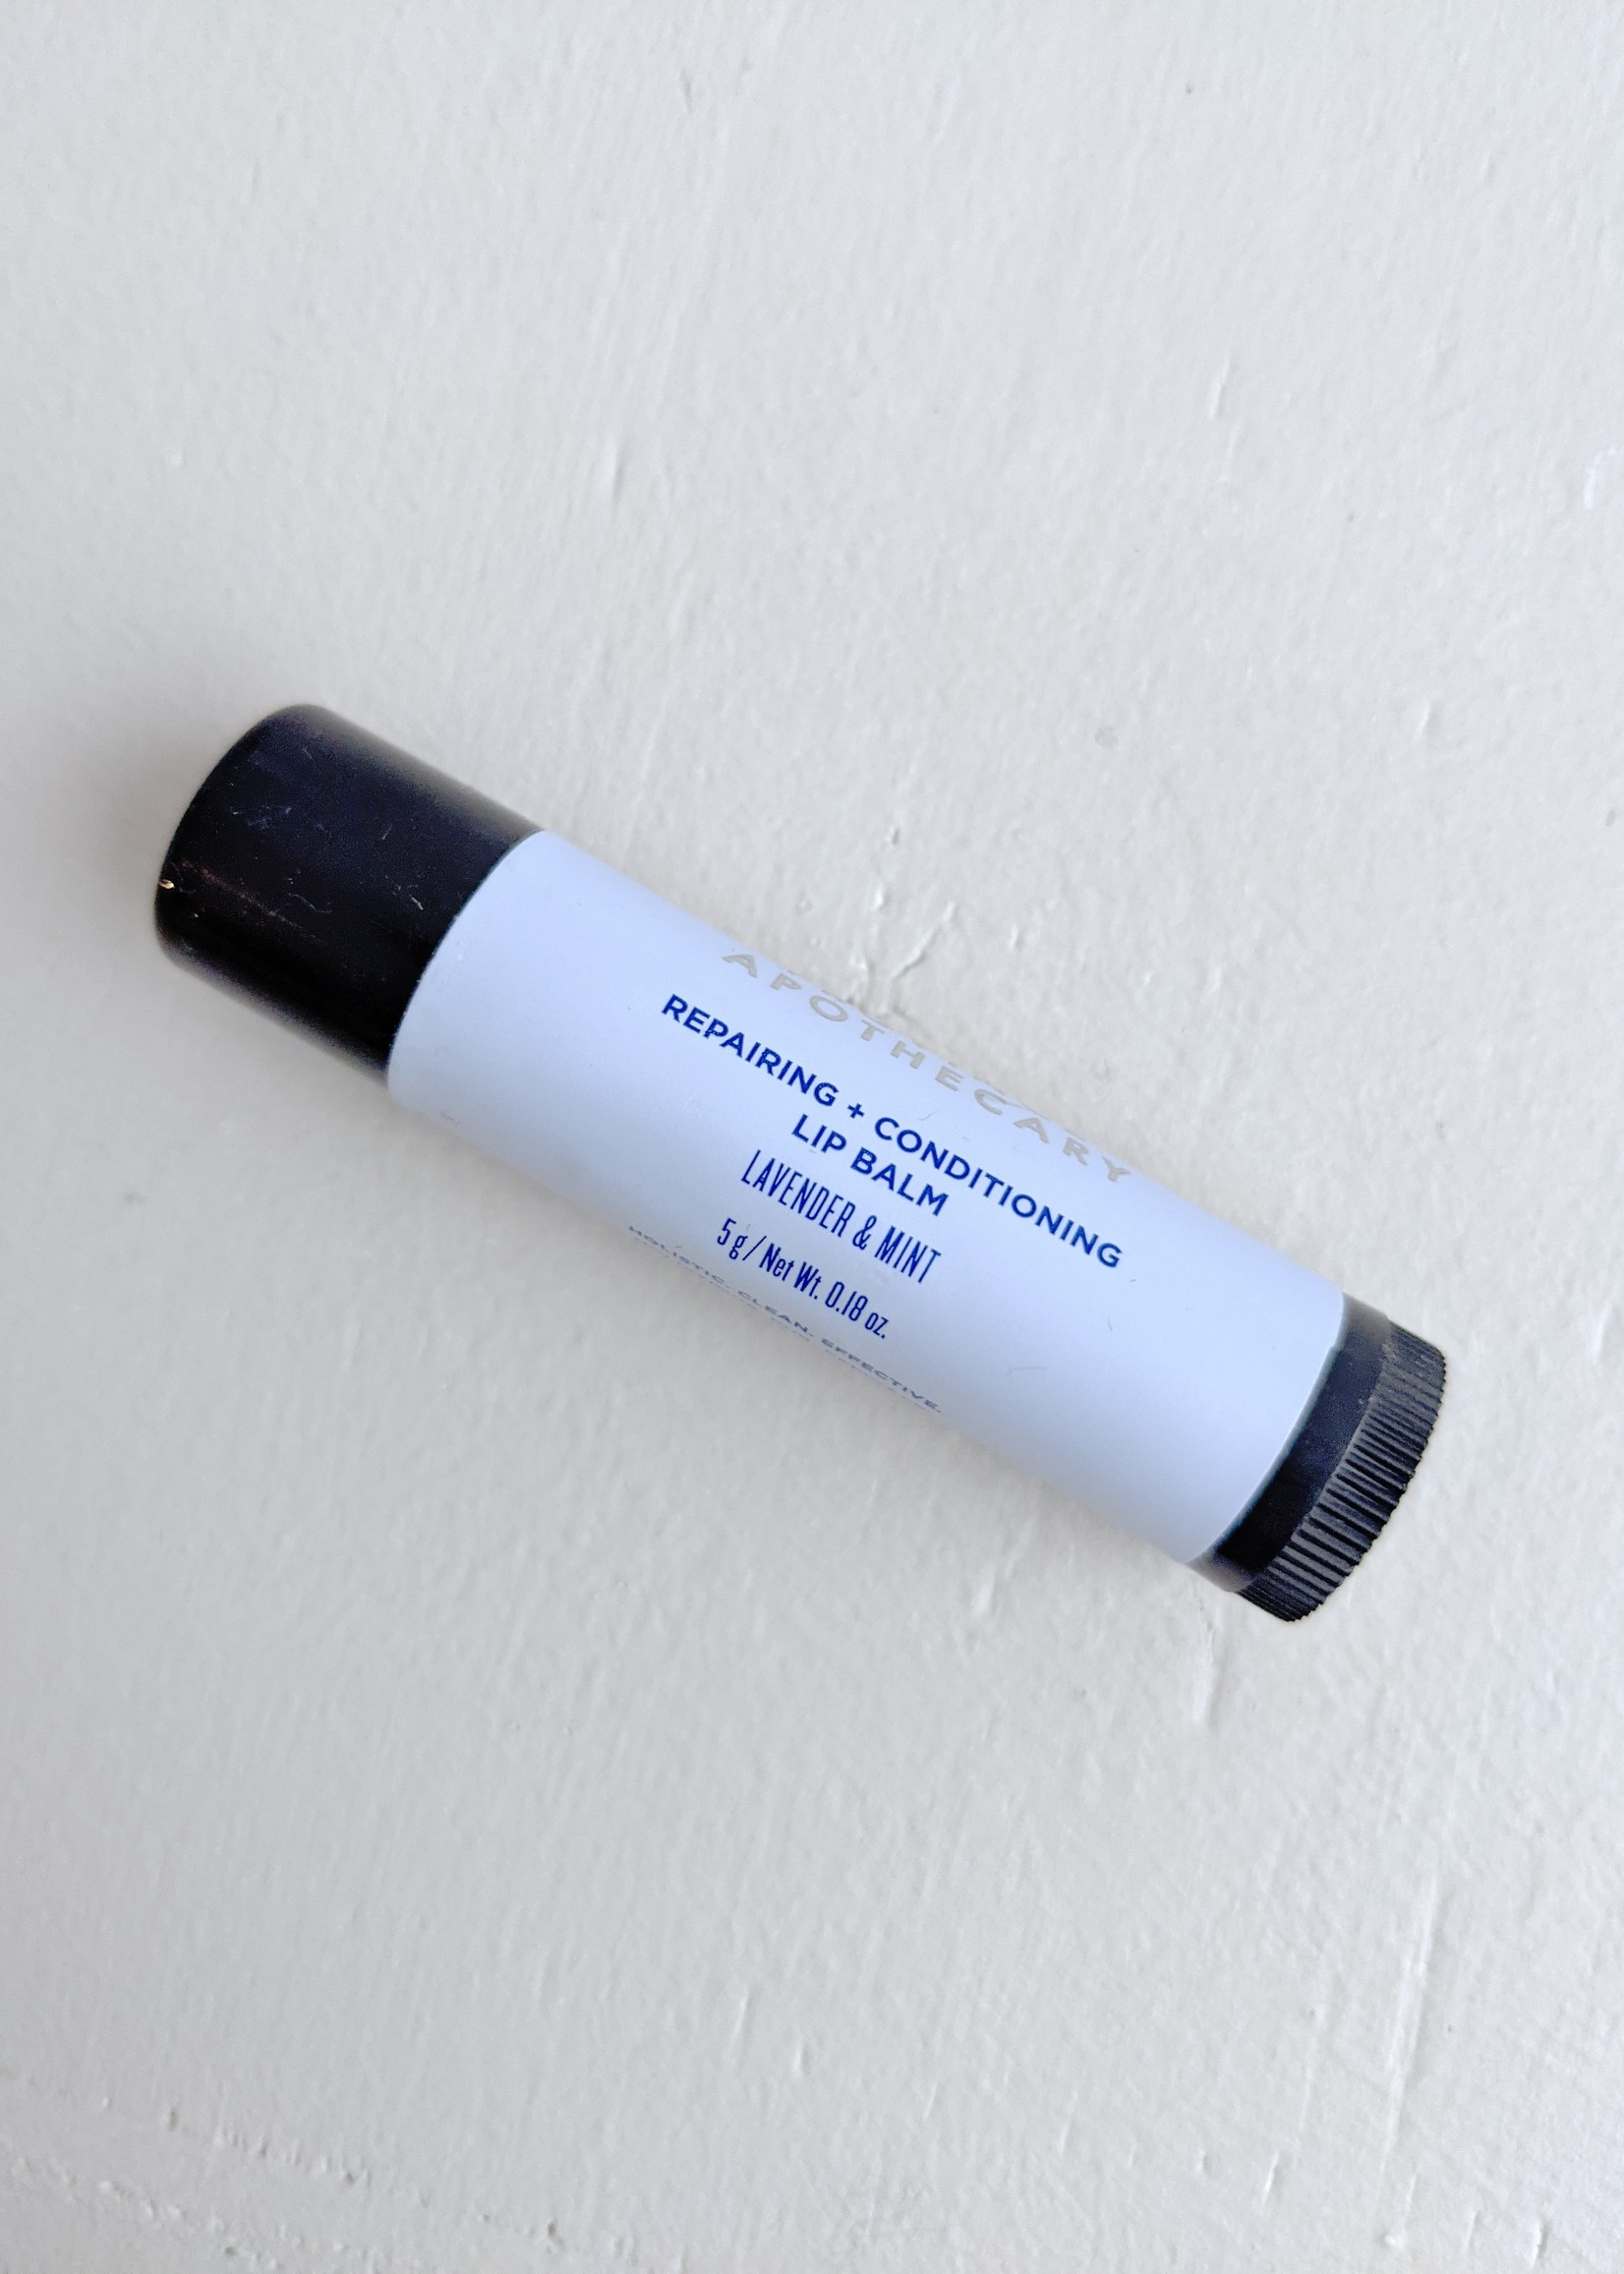 Province Apothecary Lip Balm - Repairing and Conditioning